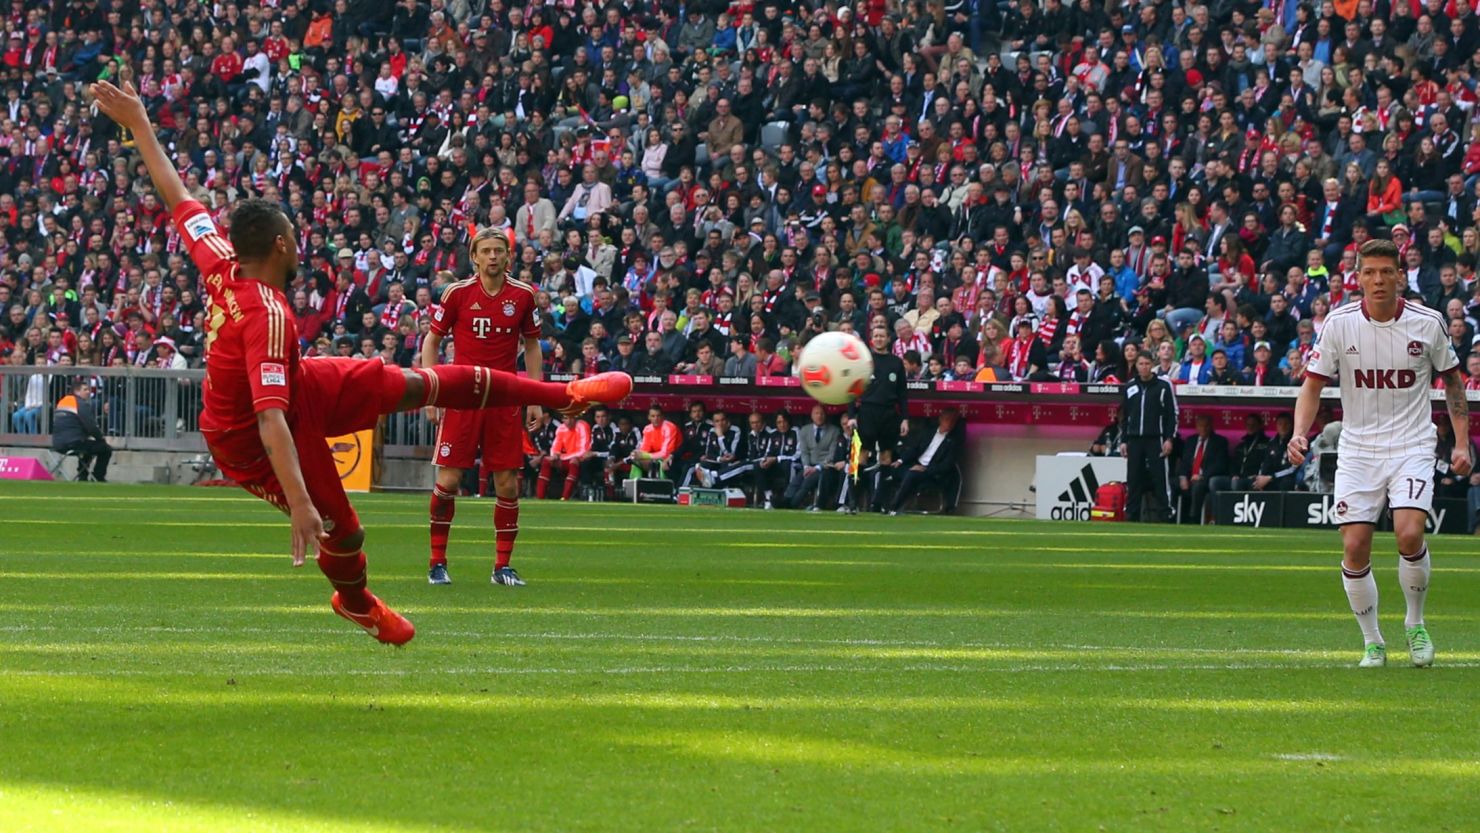 Jerome Boateng opens the scoring for Bayern Munich against Nuremburg at the Allianz Arena. 